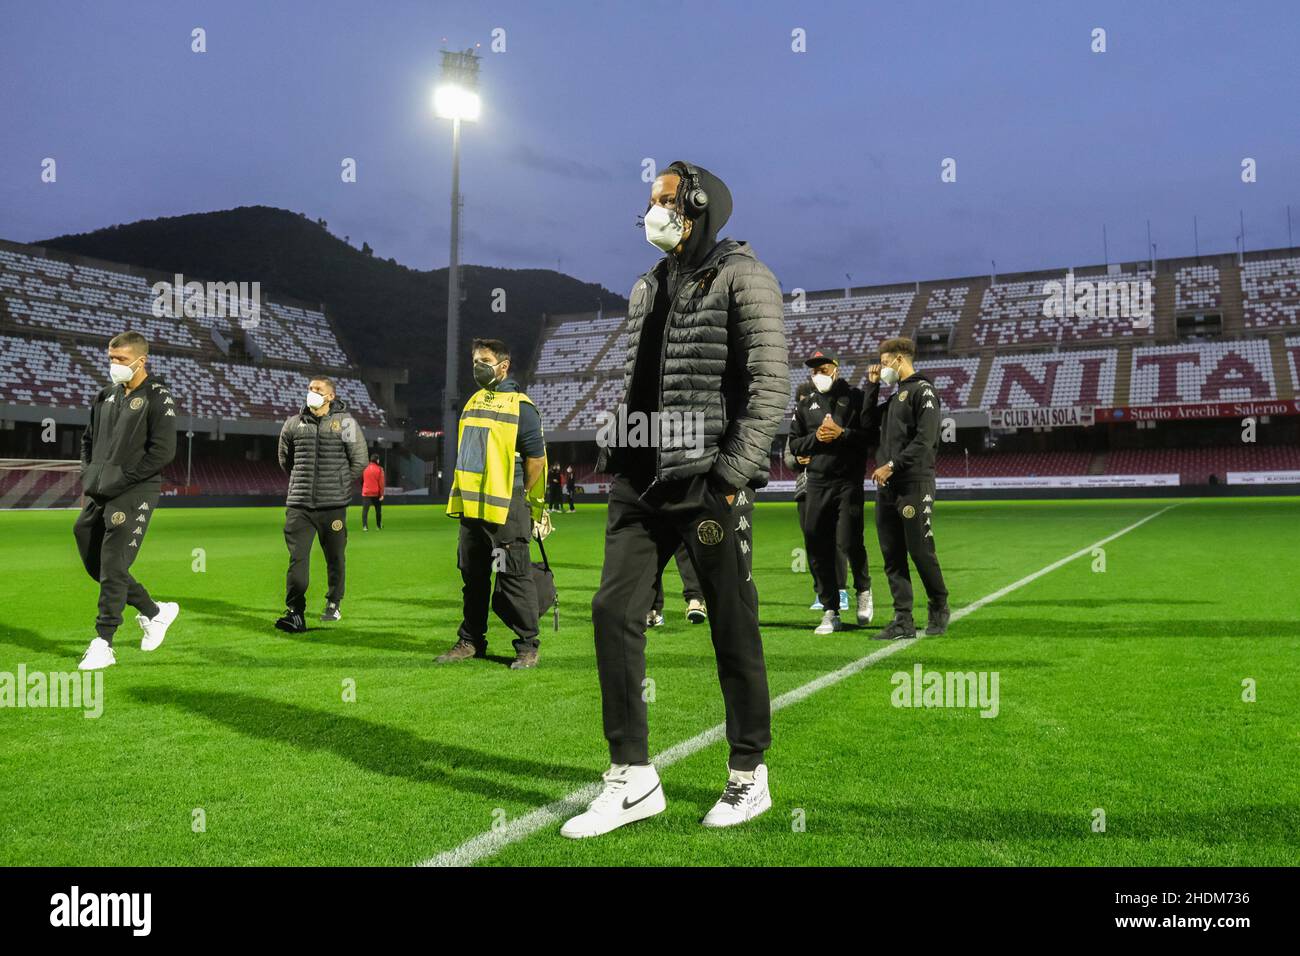 Venezia FC players on the pitch before the Serie A match between US Salernitana and Venezia FC at Stadio Arechi on January 06, 2022 in Salerno, Italy. US Salernitana team counted at least 9 positive players due to the Sars Cov19 Omicron variant expansion. Stock Photo